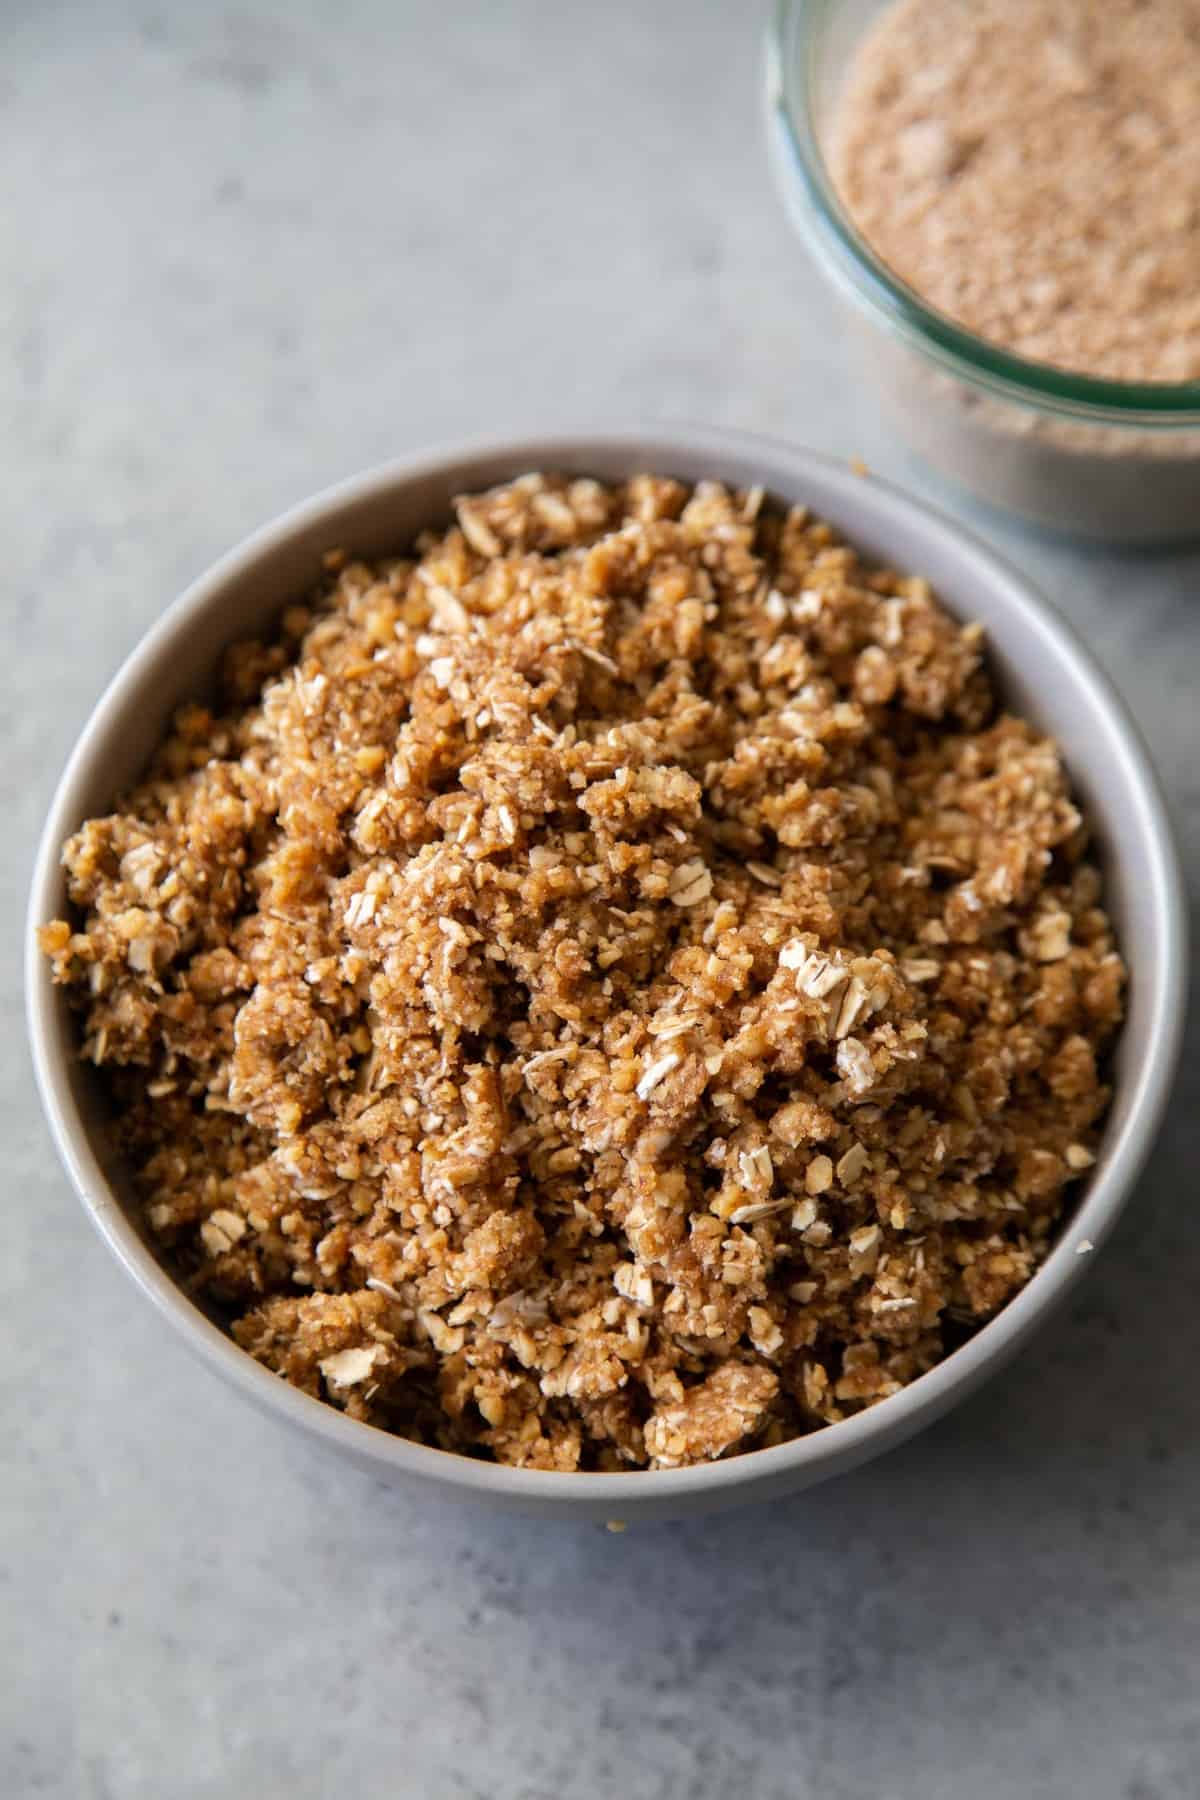 crumble topping made from butter, oats, walnuts, and spices